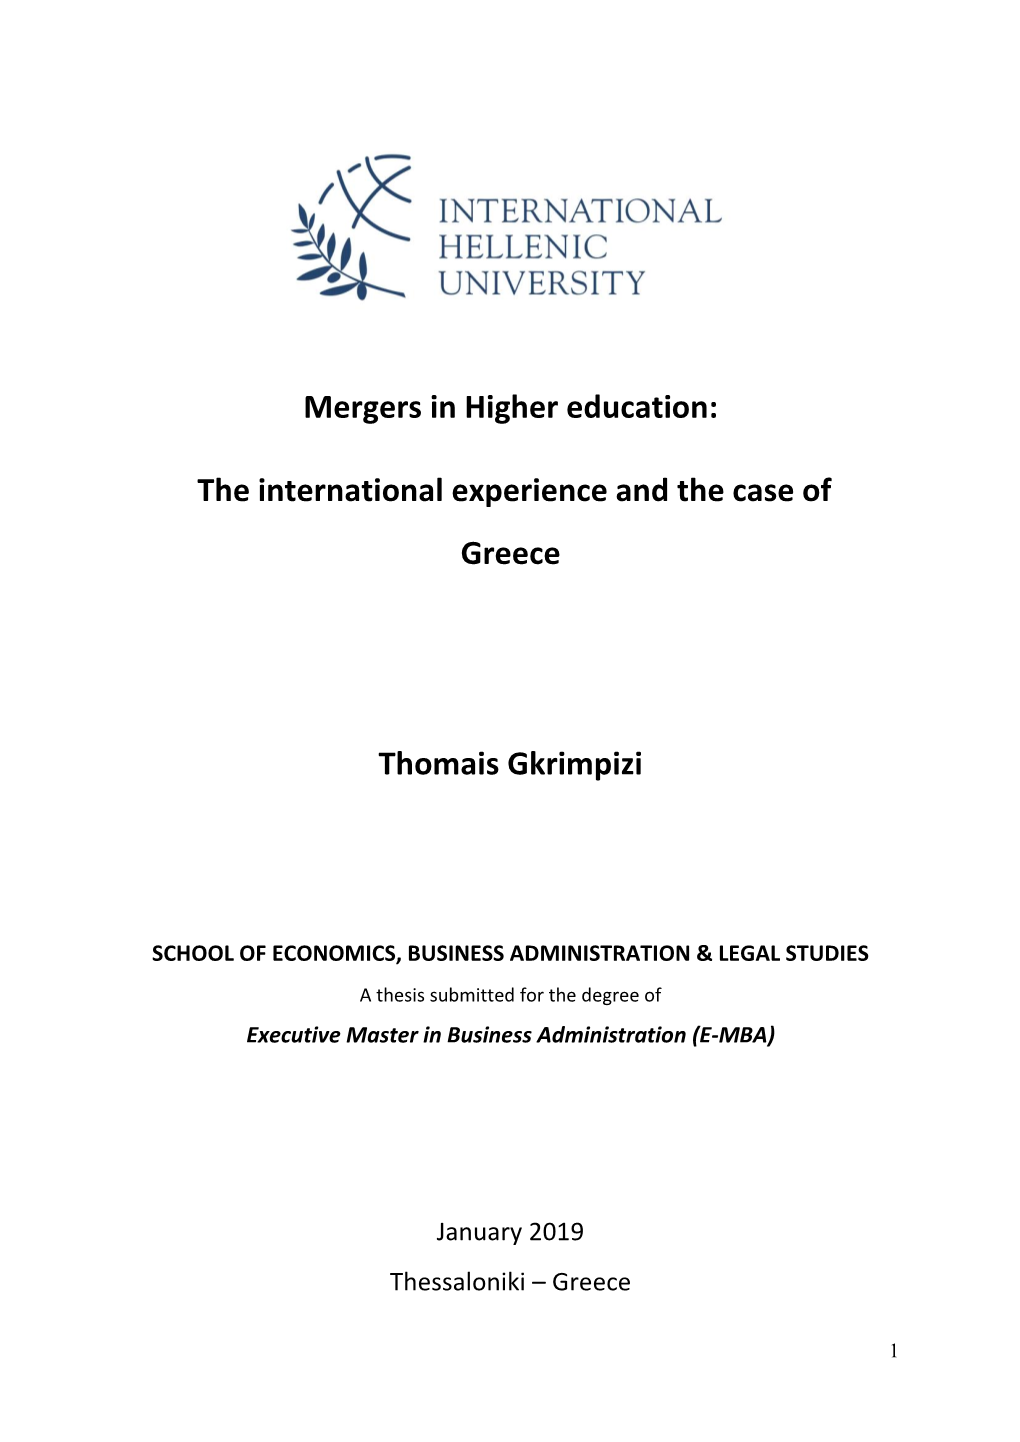 Mergers in Higher Education: the International Experience and The